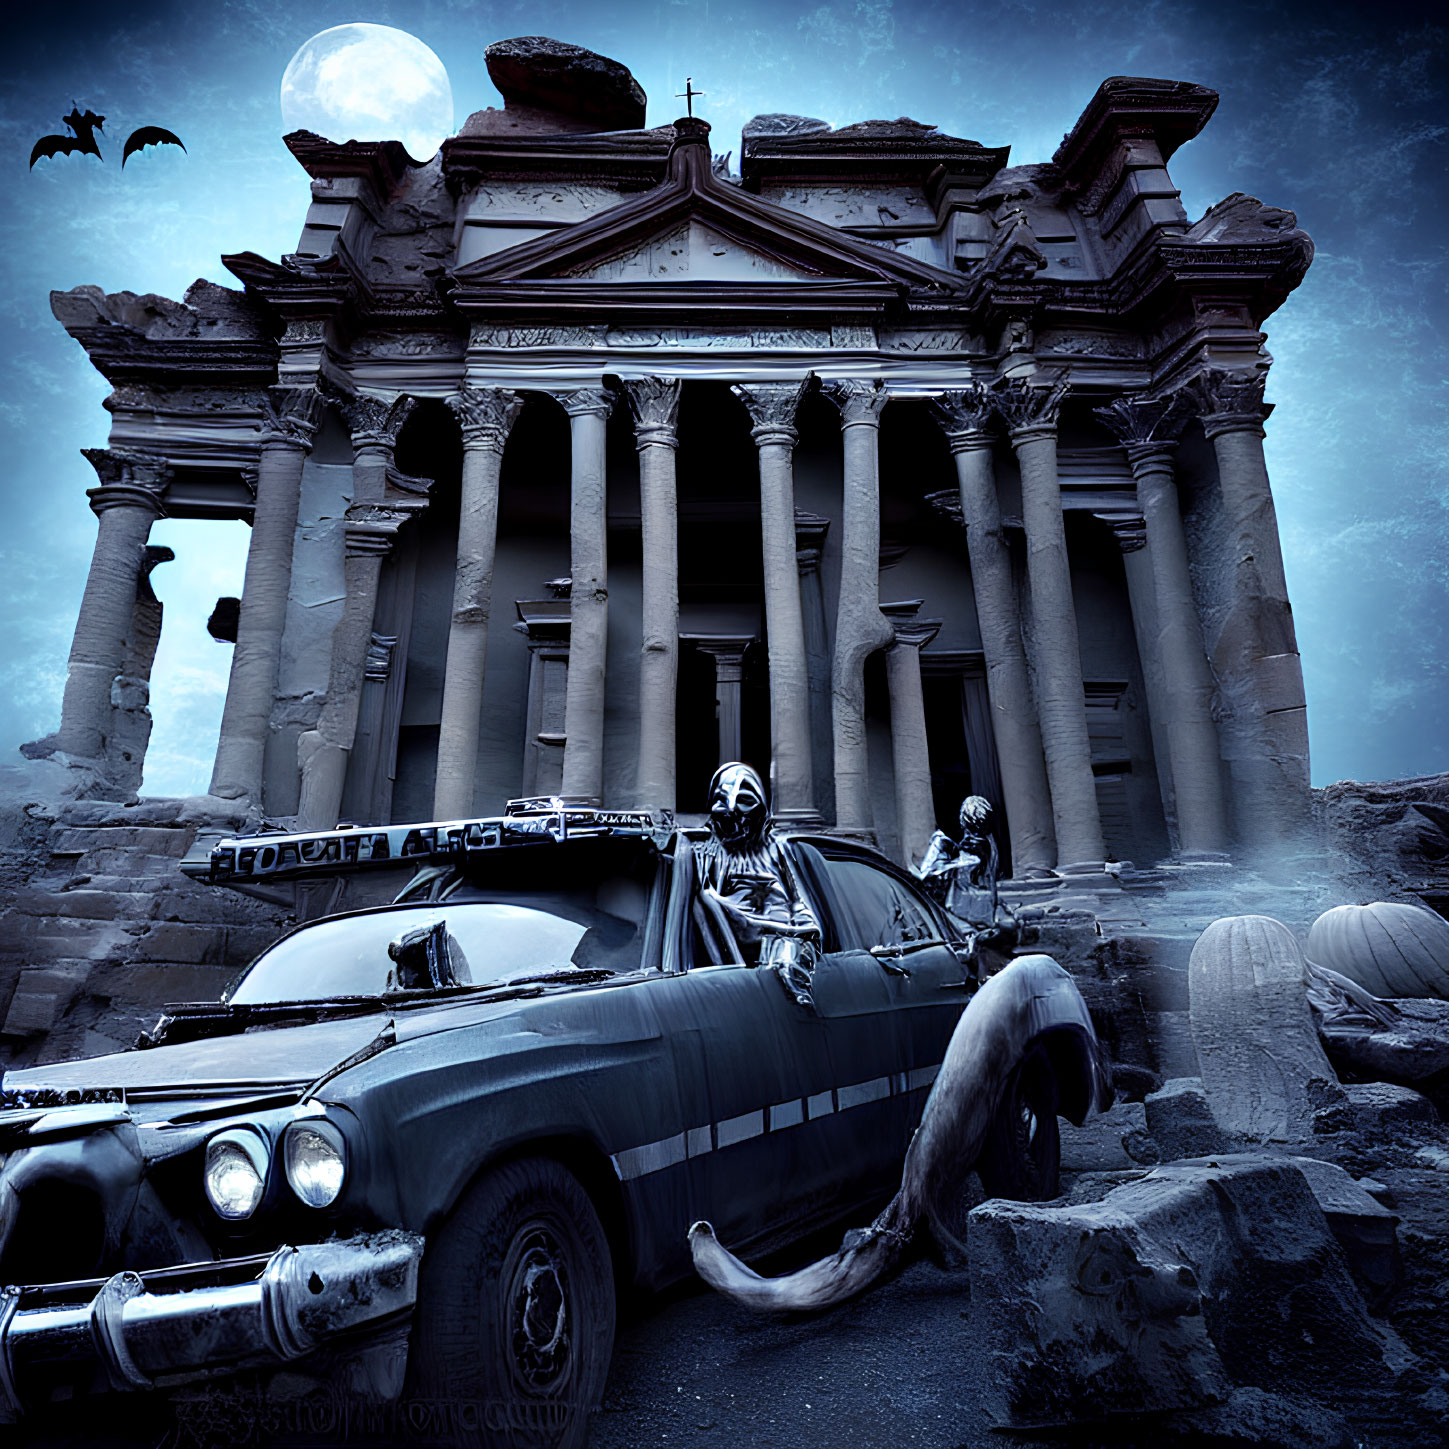 Gothic scene: skeletons in hearse at ancient temple with flying bats